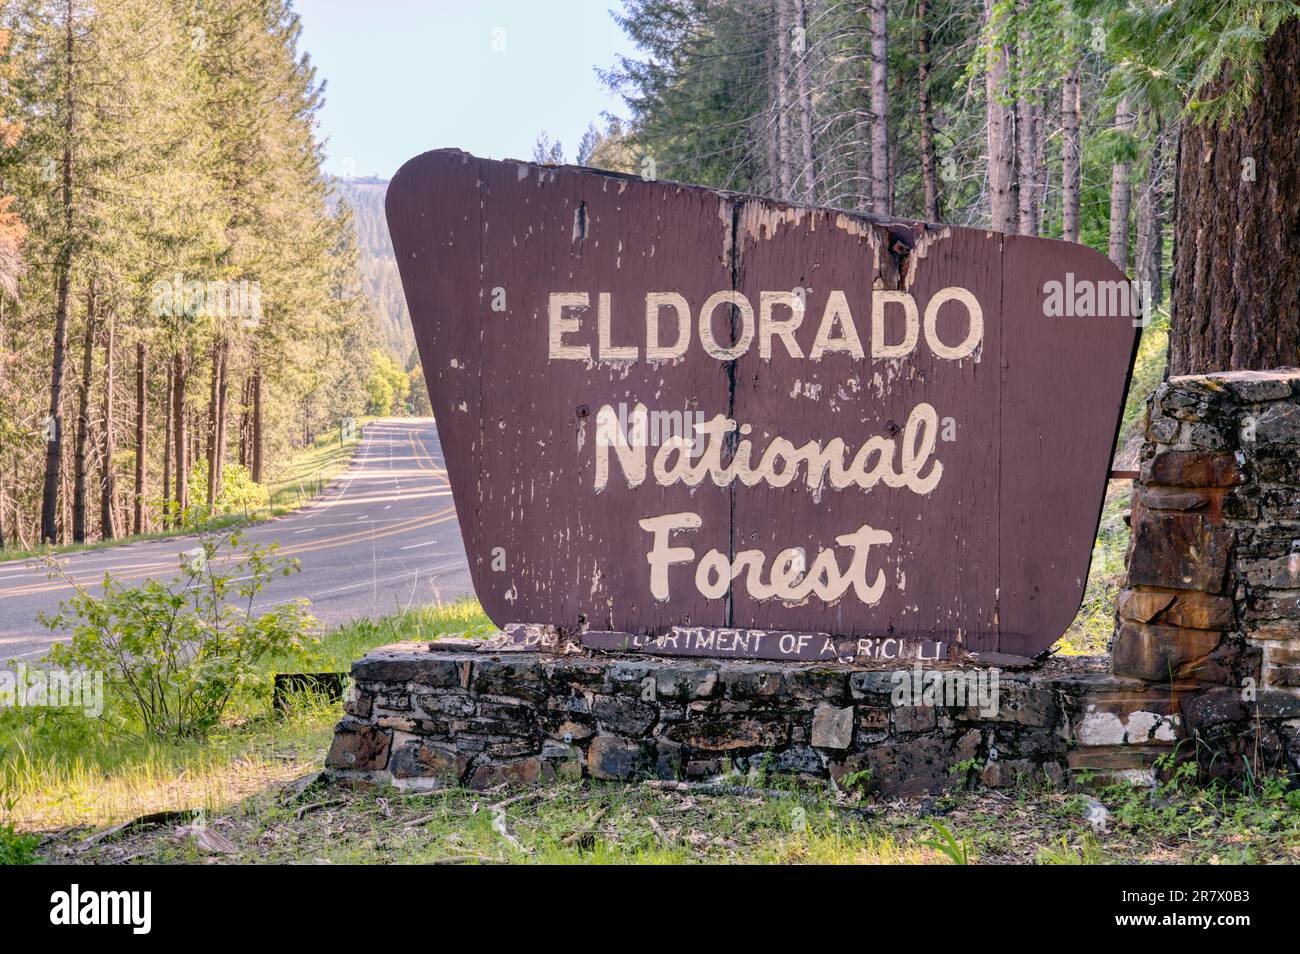 Eldorado National Forest welcome sign along the road in California Stock Photo